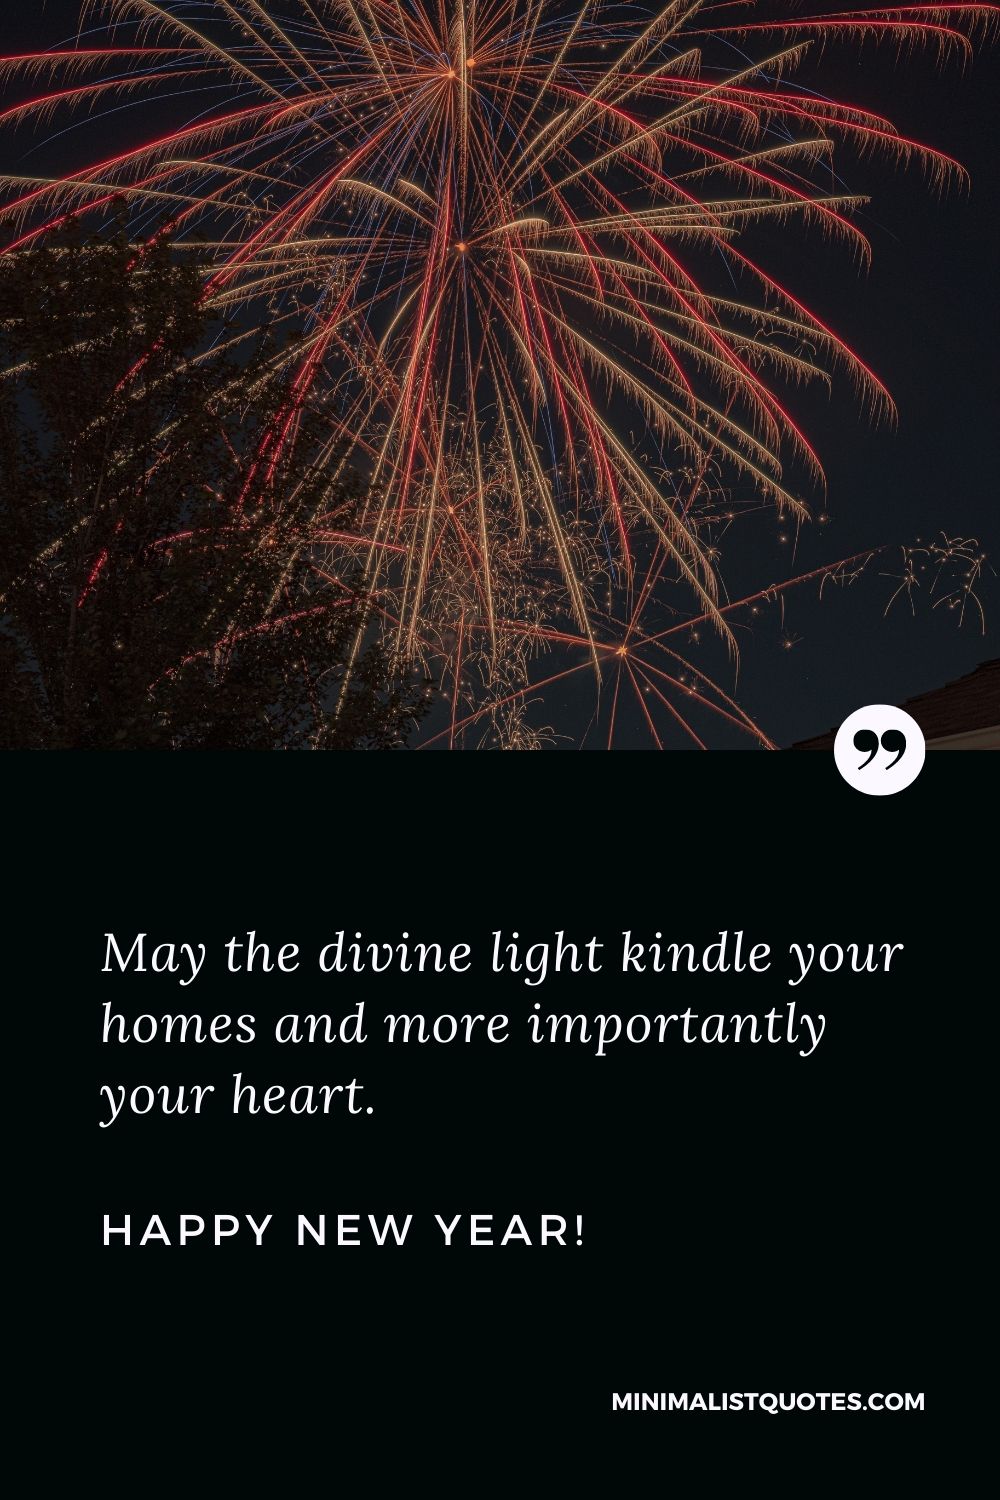 Happy new year messages 2022: May the divine light kindle your homes, and more importantly your heart. Happy New Year!